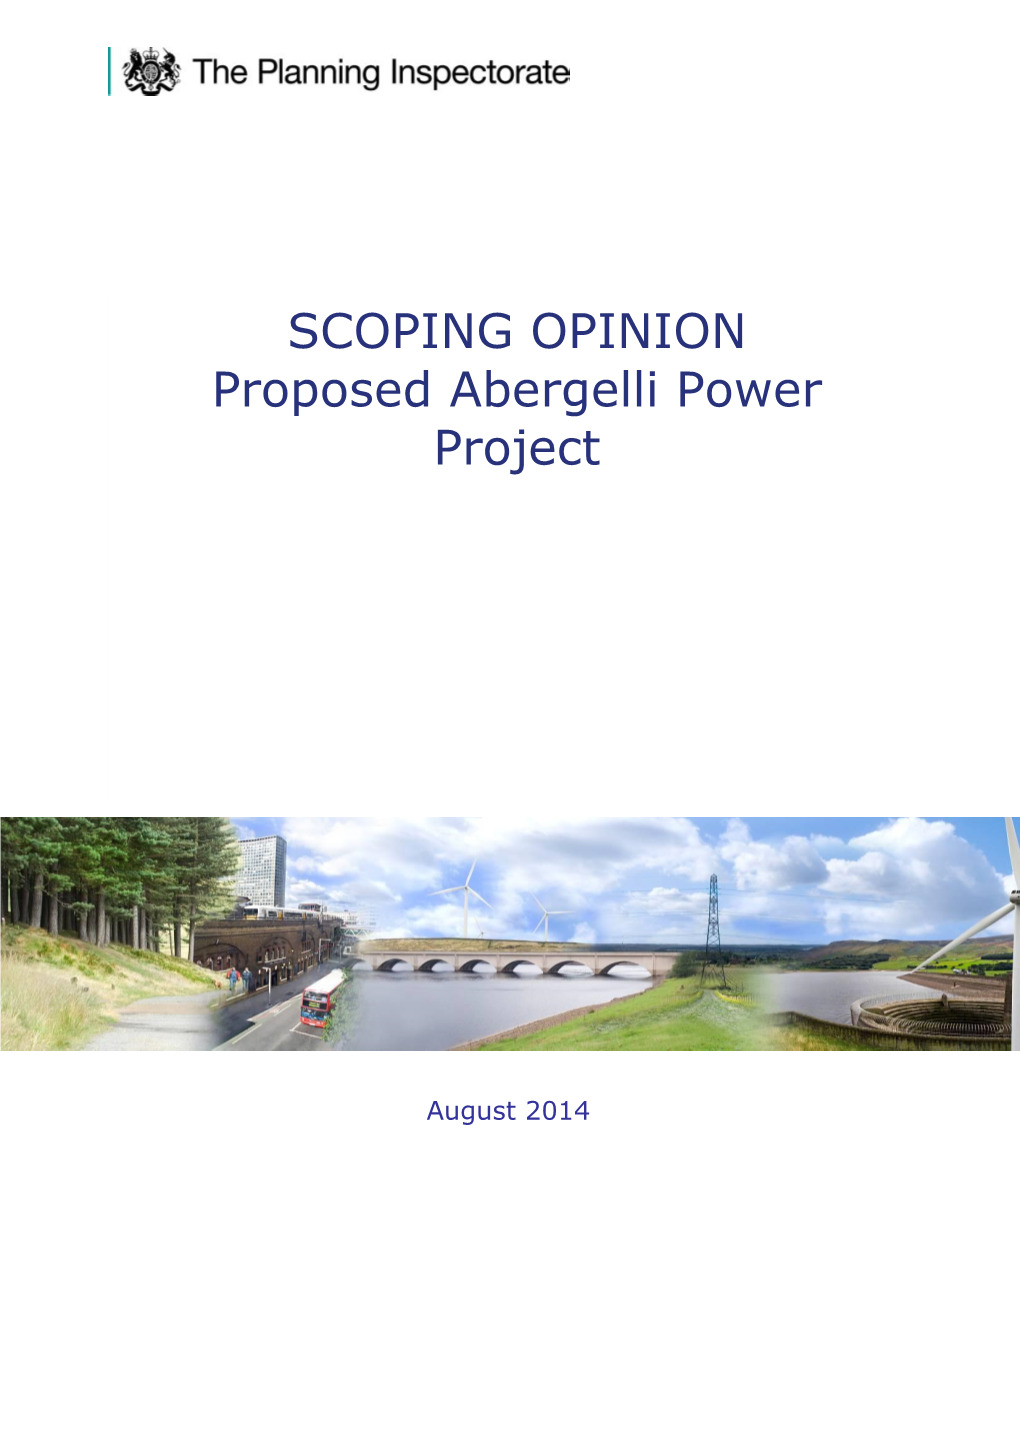 SCOPING OPINION Proposed Abergelli Power Project